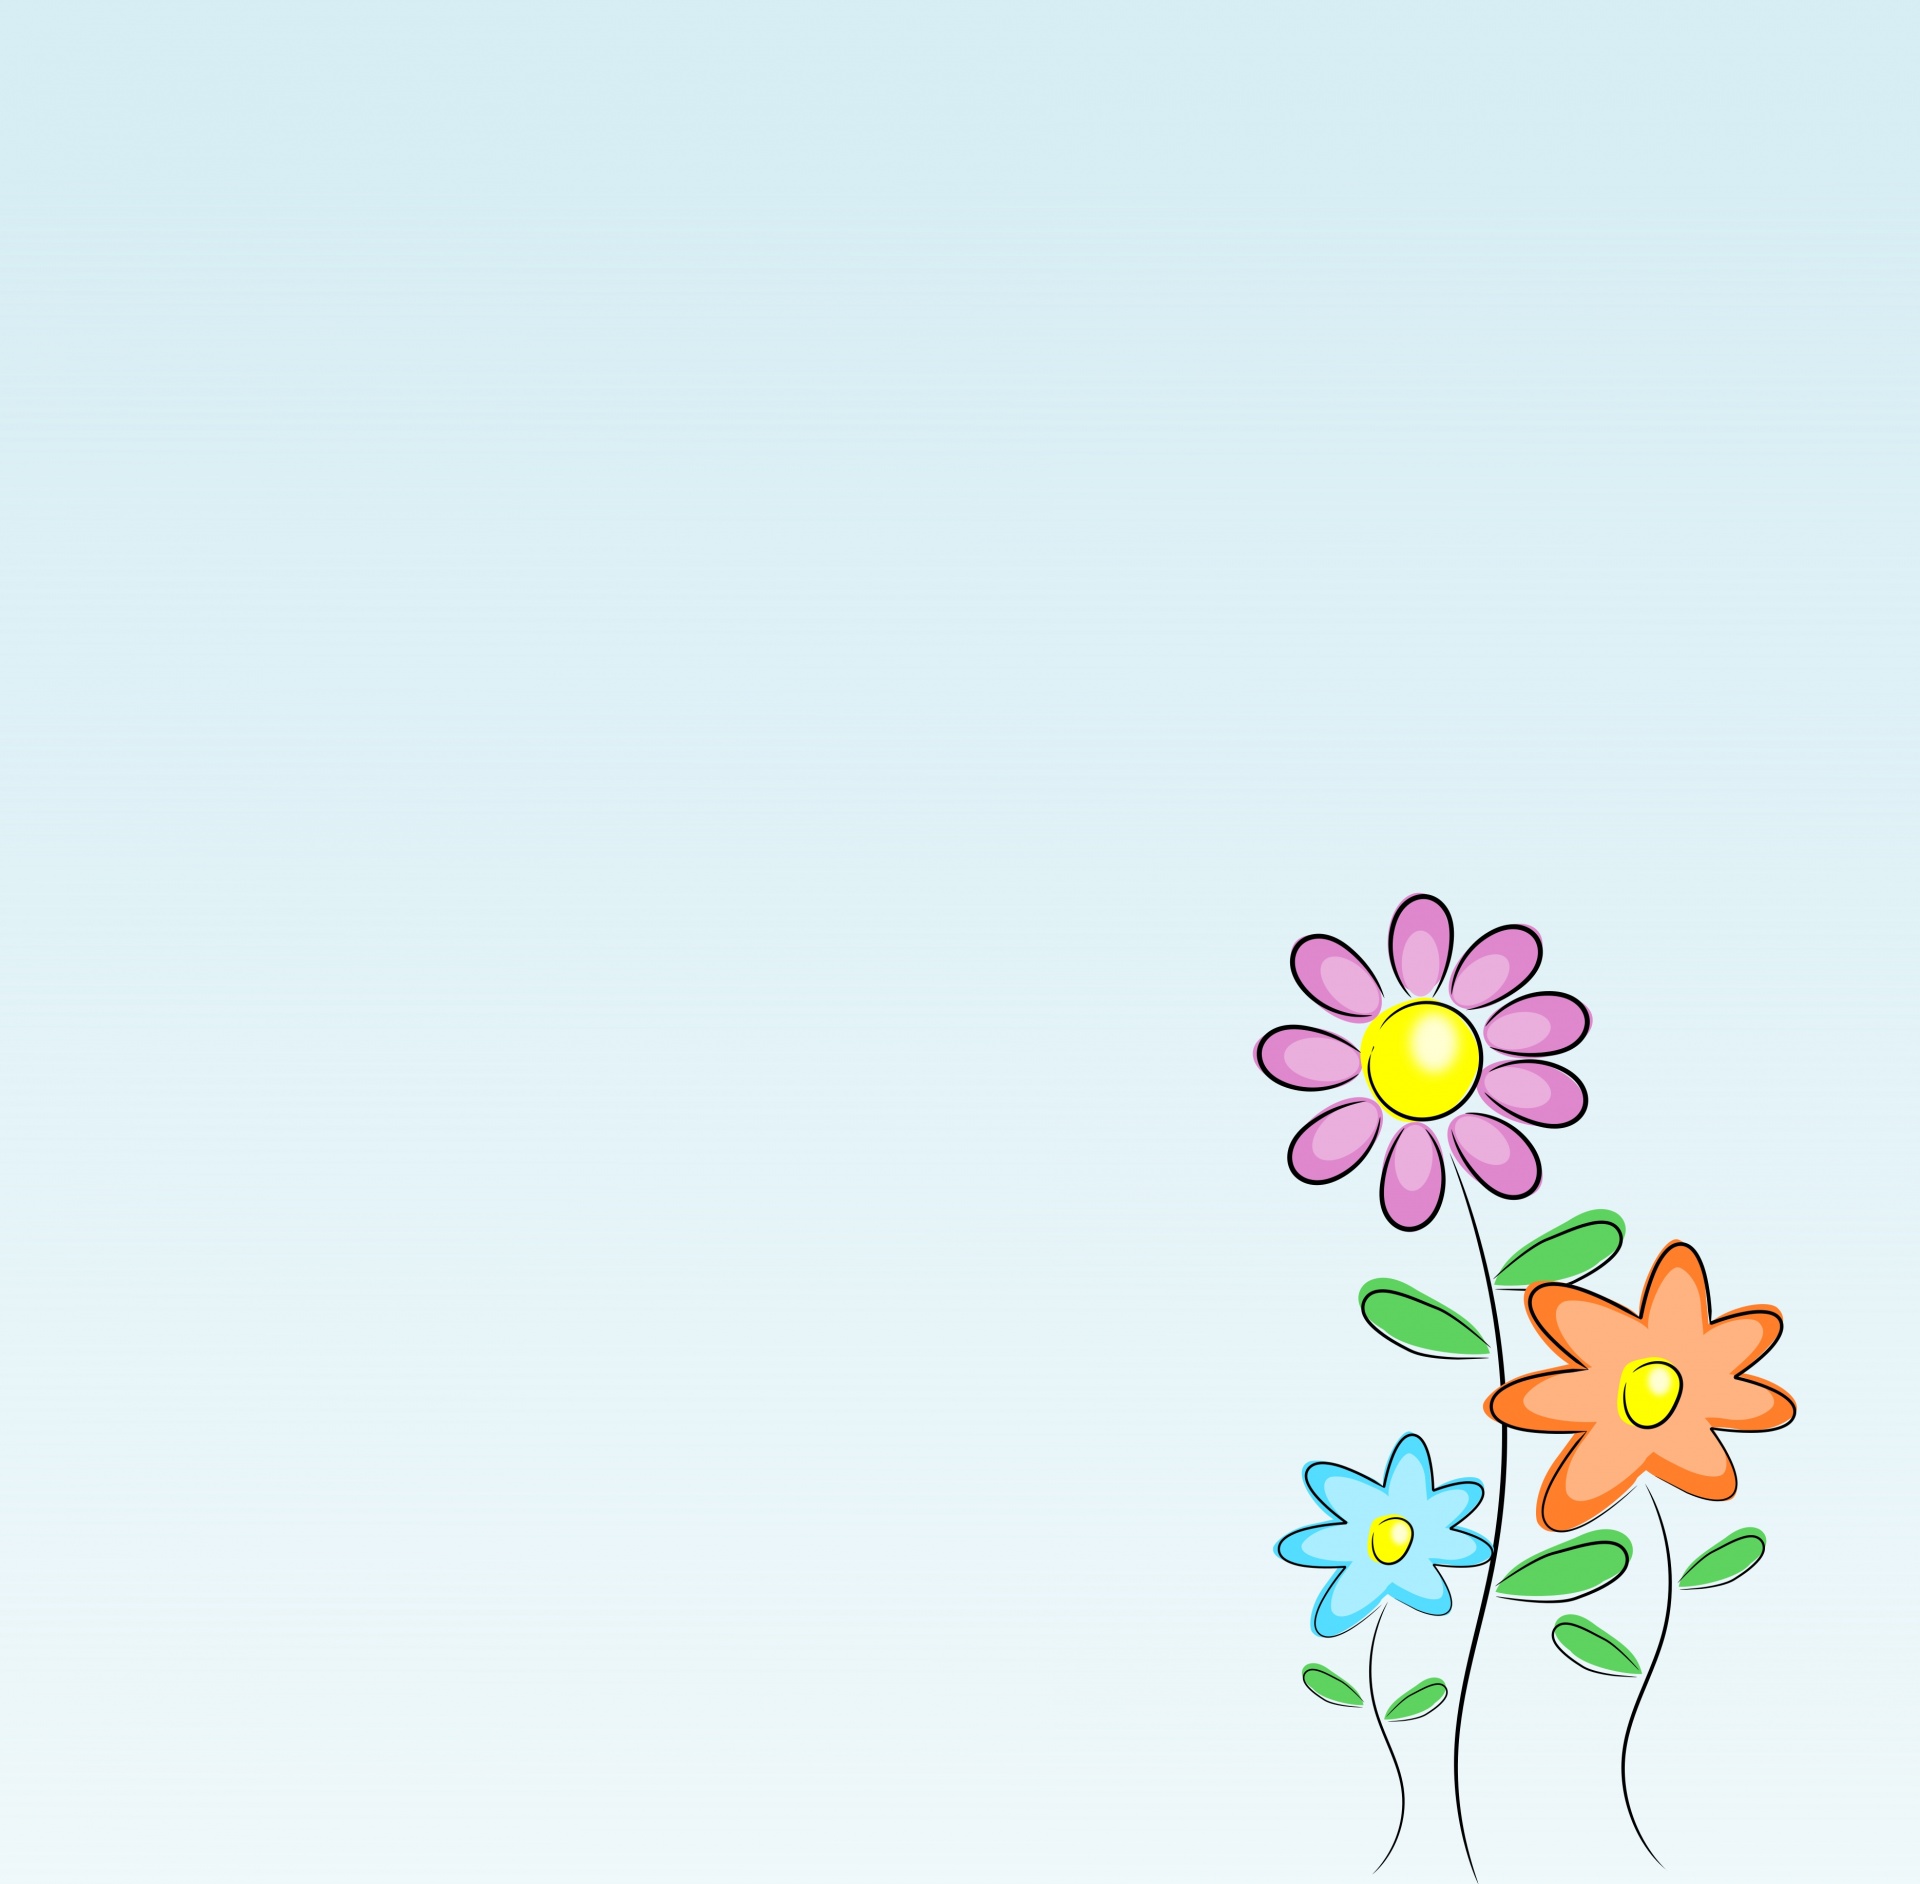 flowers background designs free photo